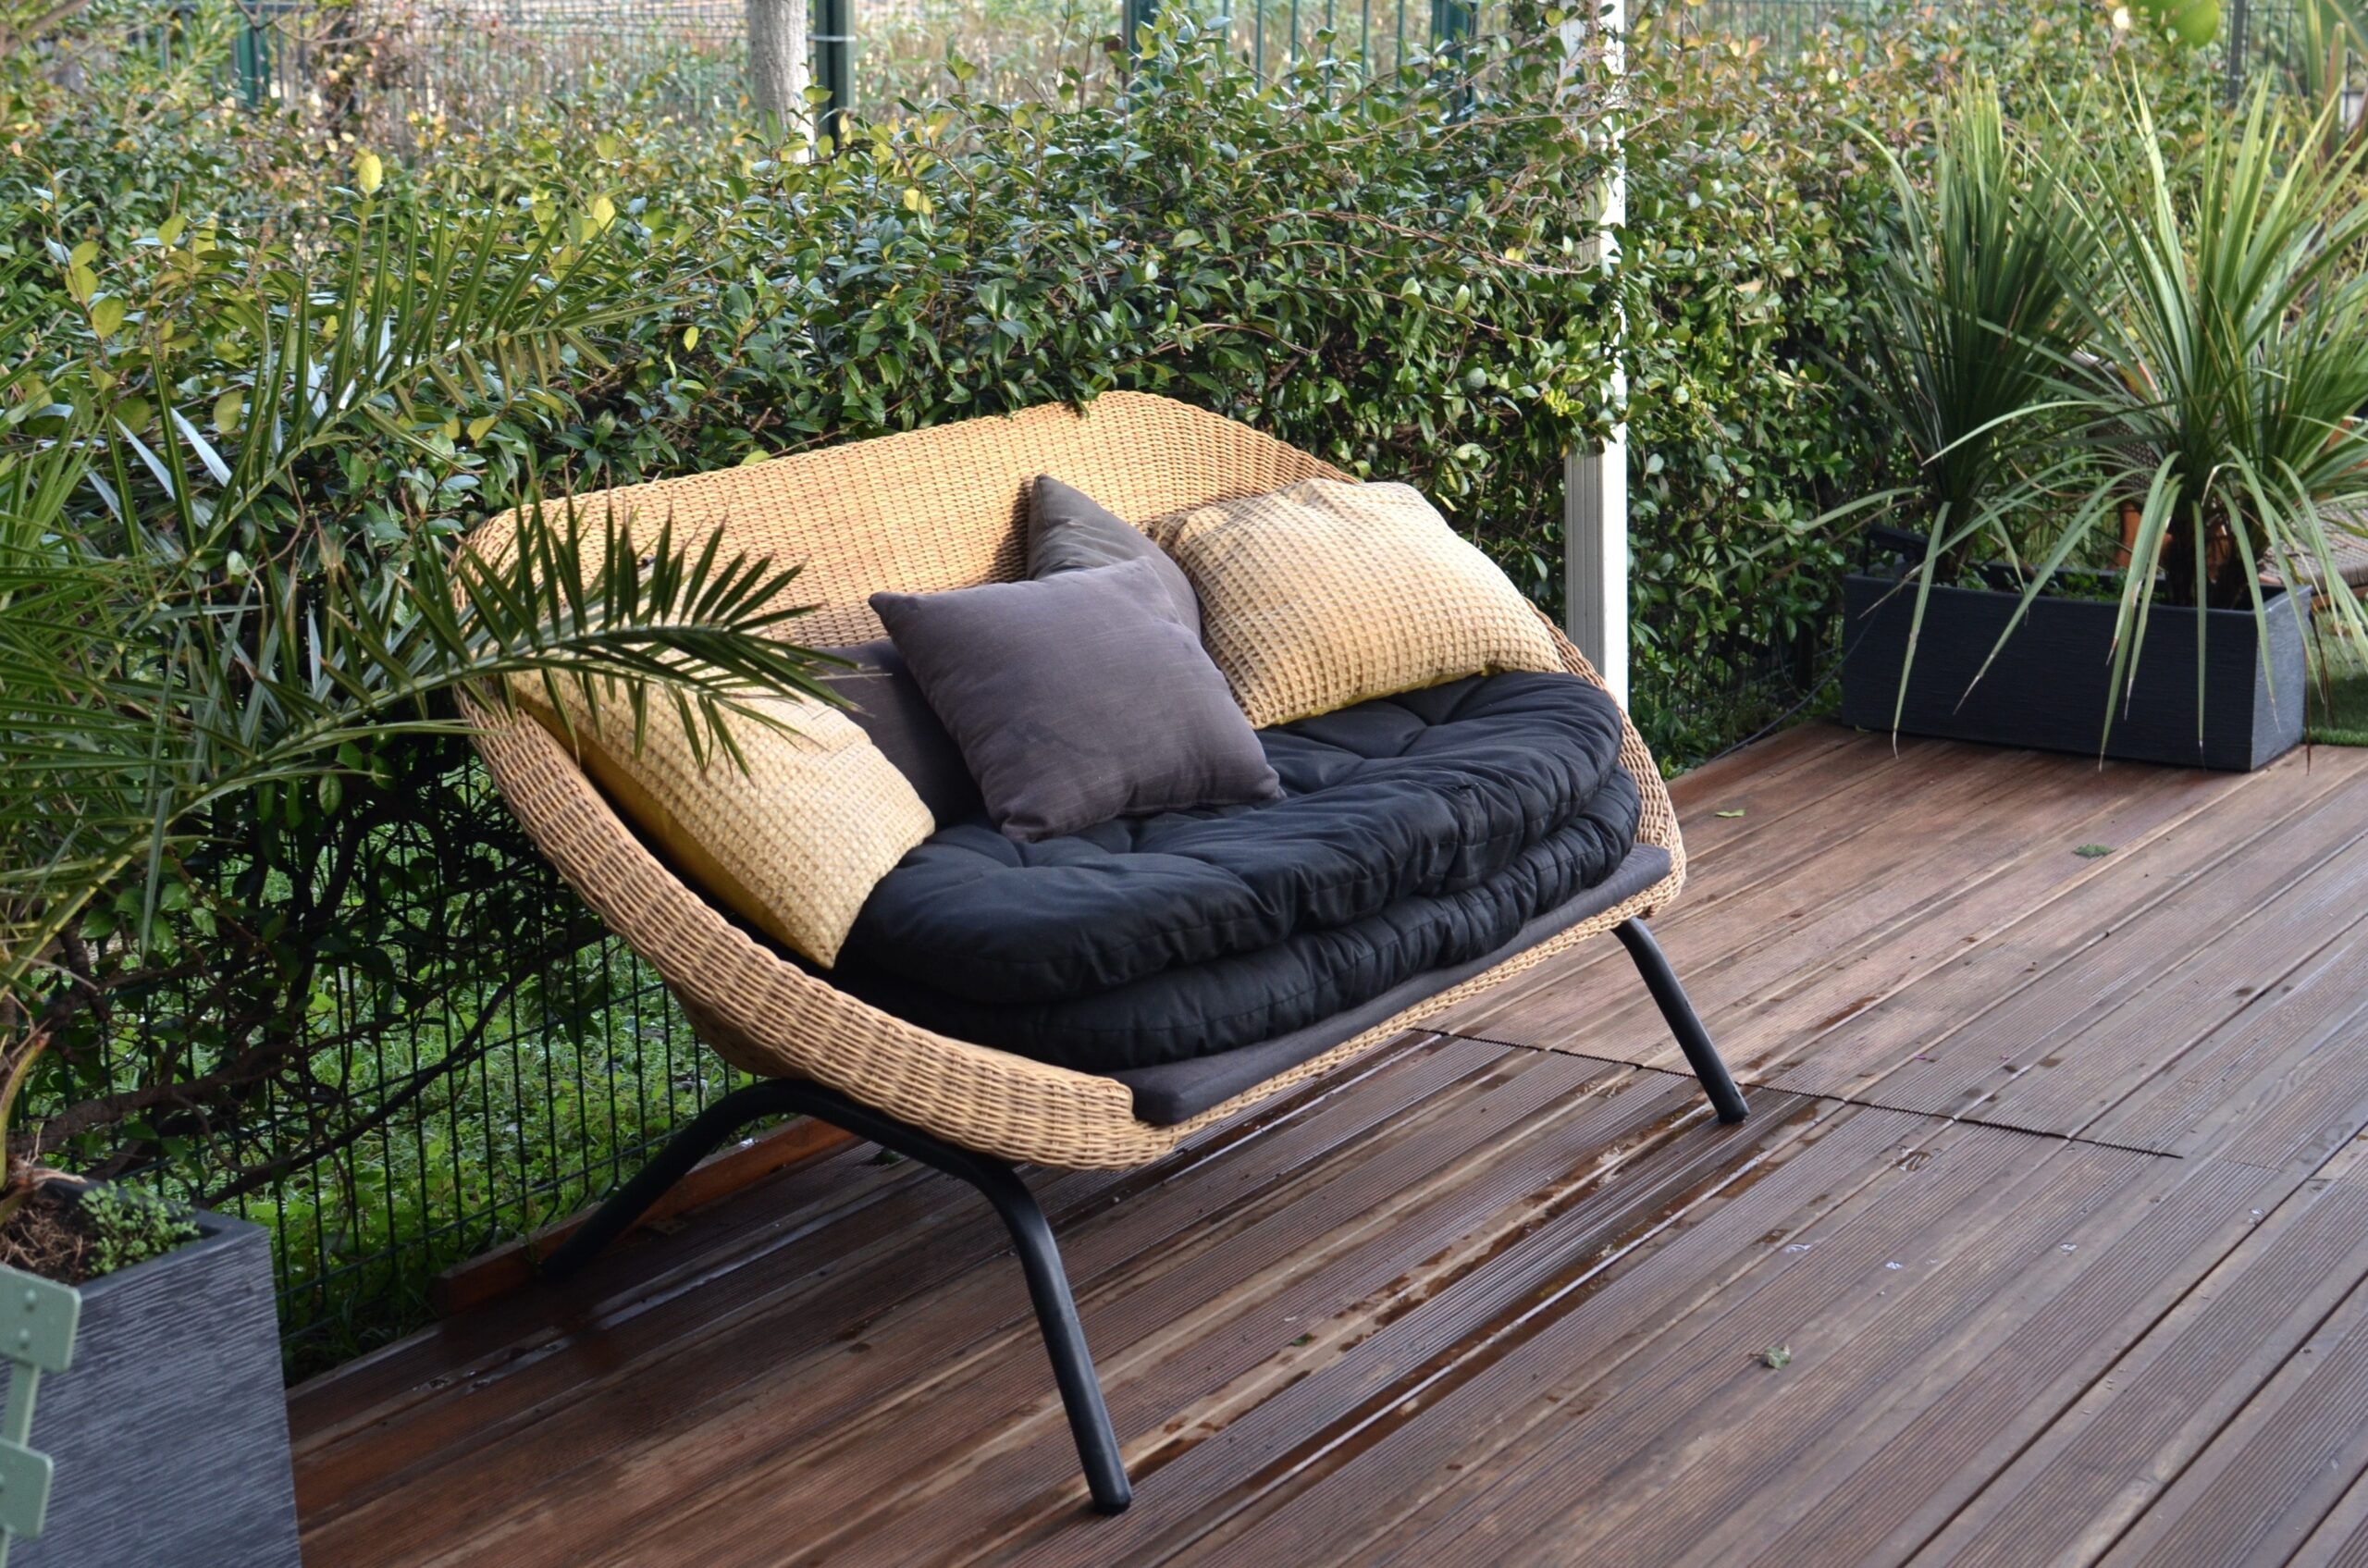 How to Fix Wicker Patio Furniture